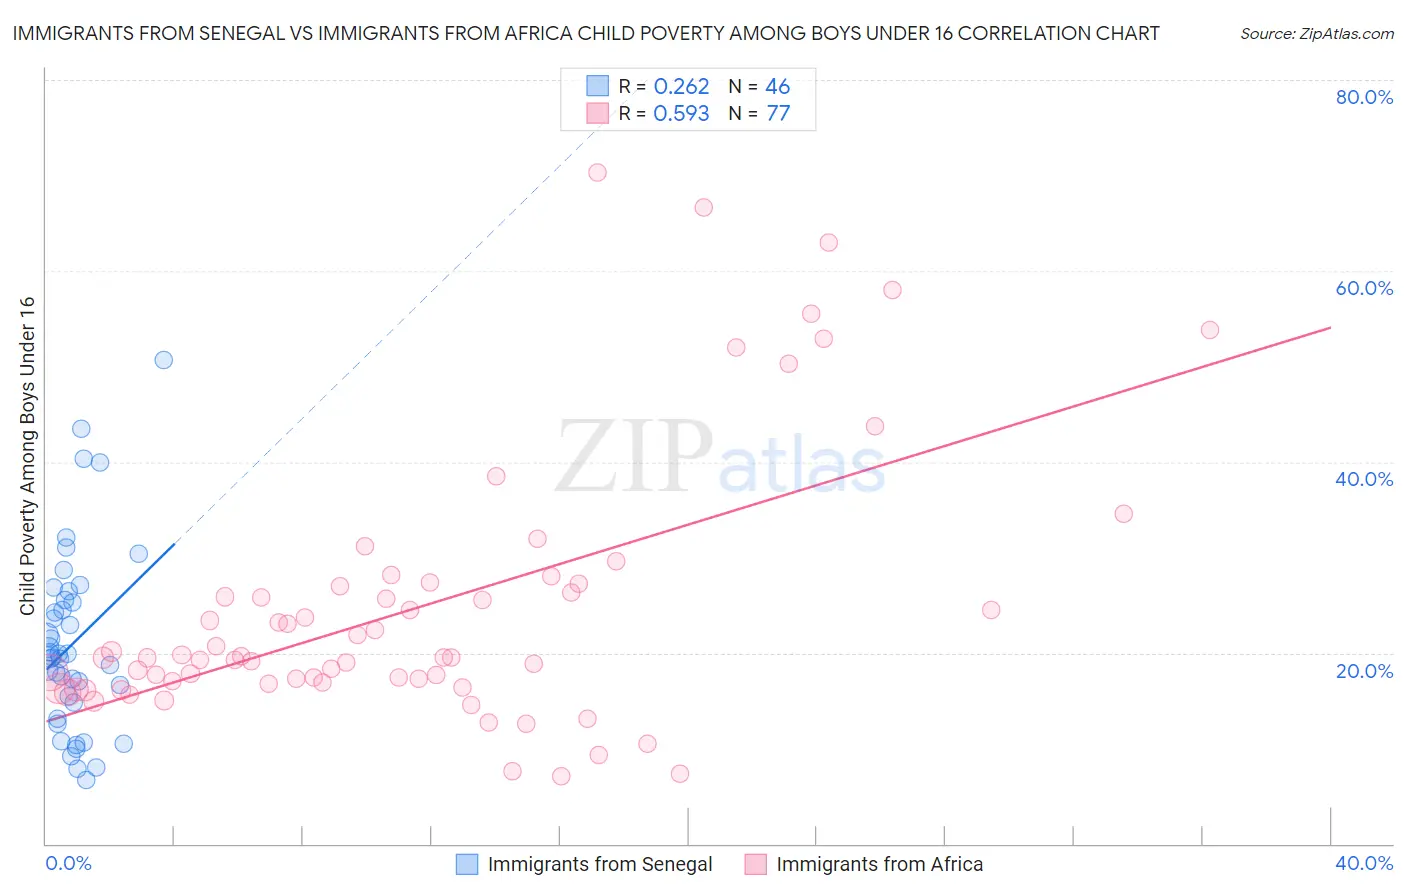 Immigrants from Senegal vs Immigrants from Africa Child Poverty Among Boys Under 16